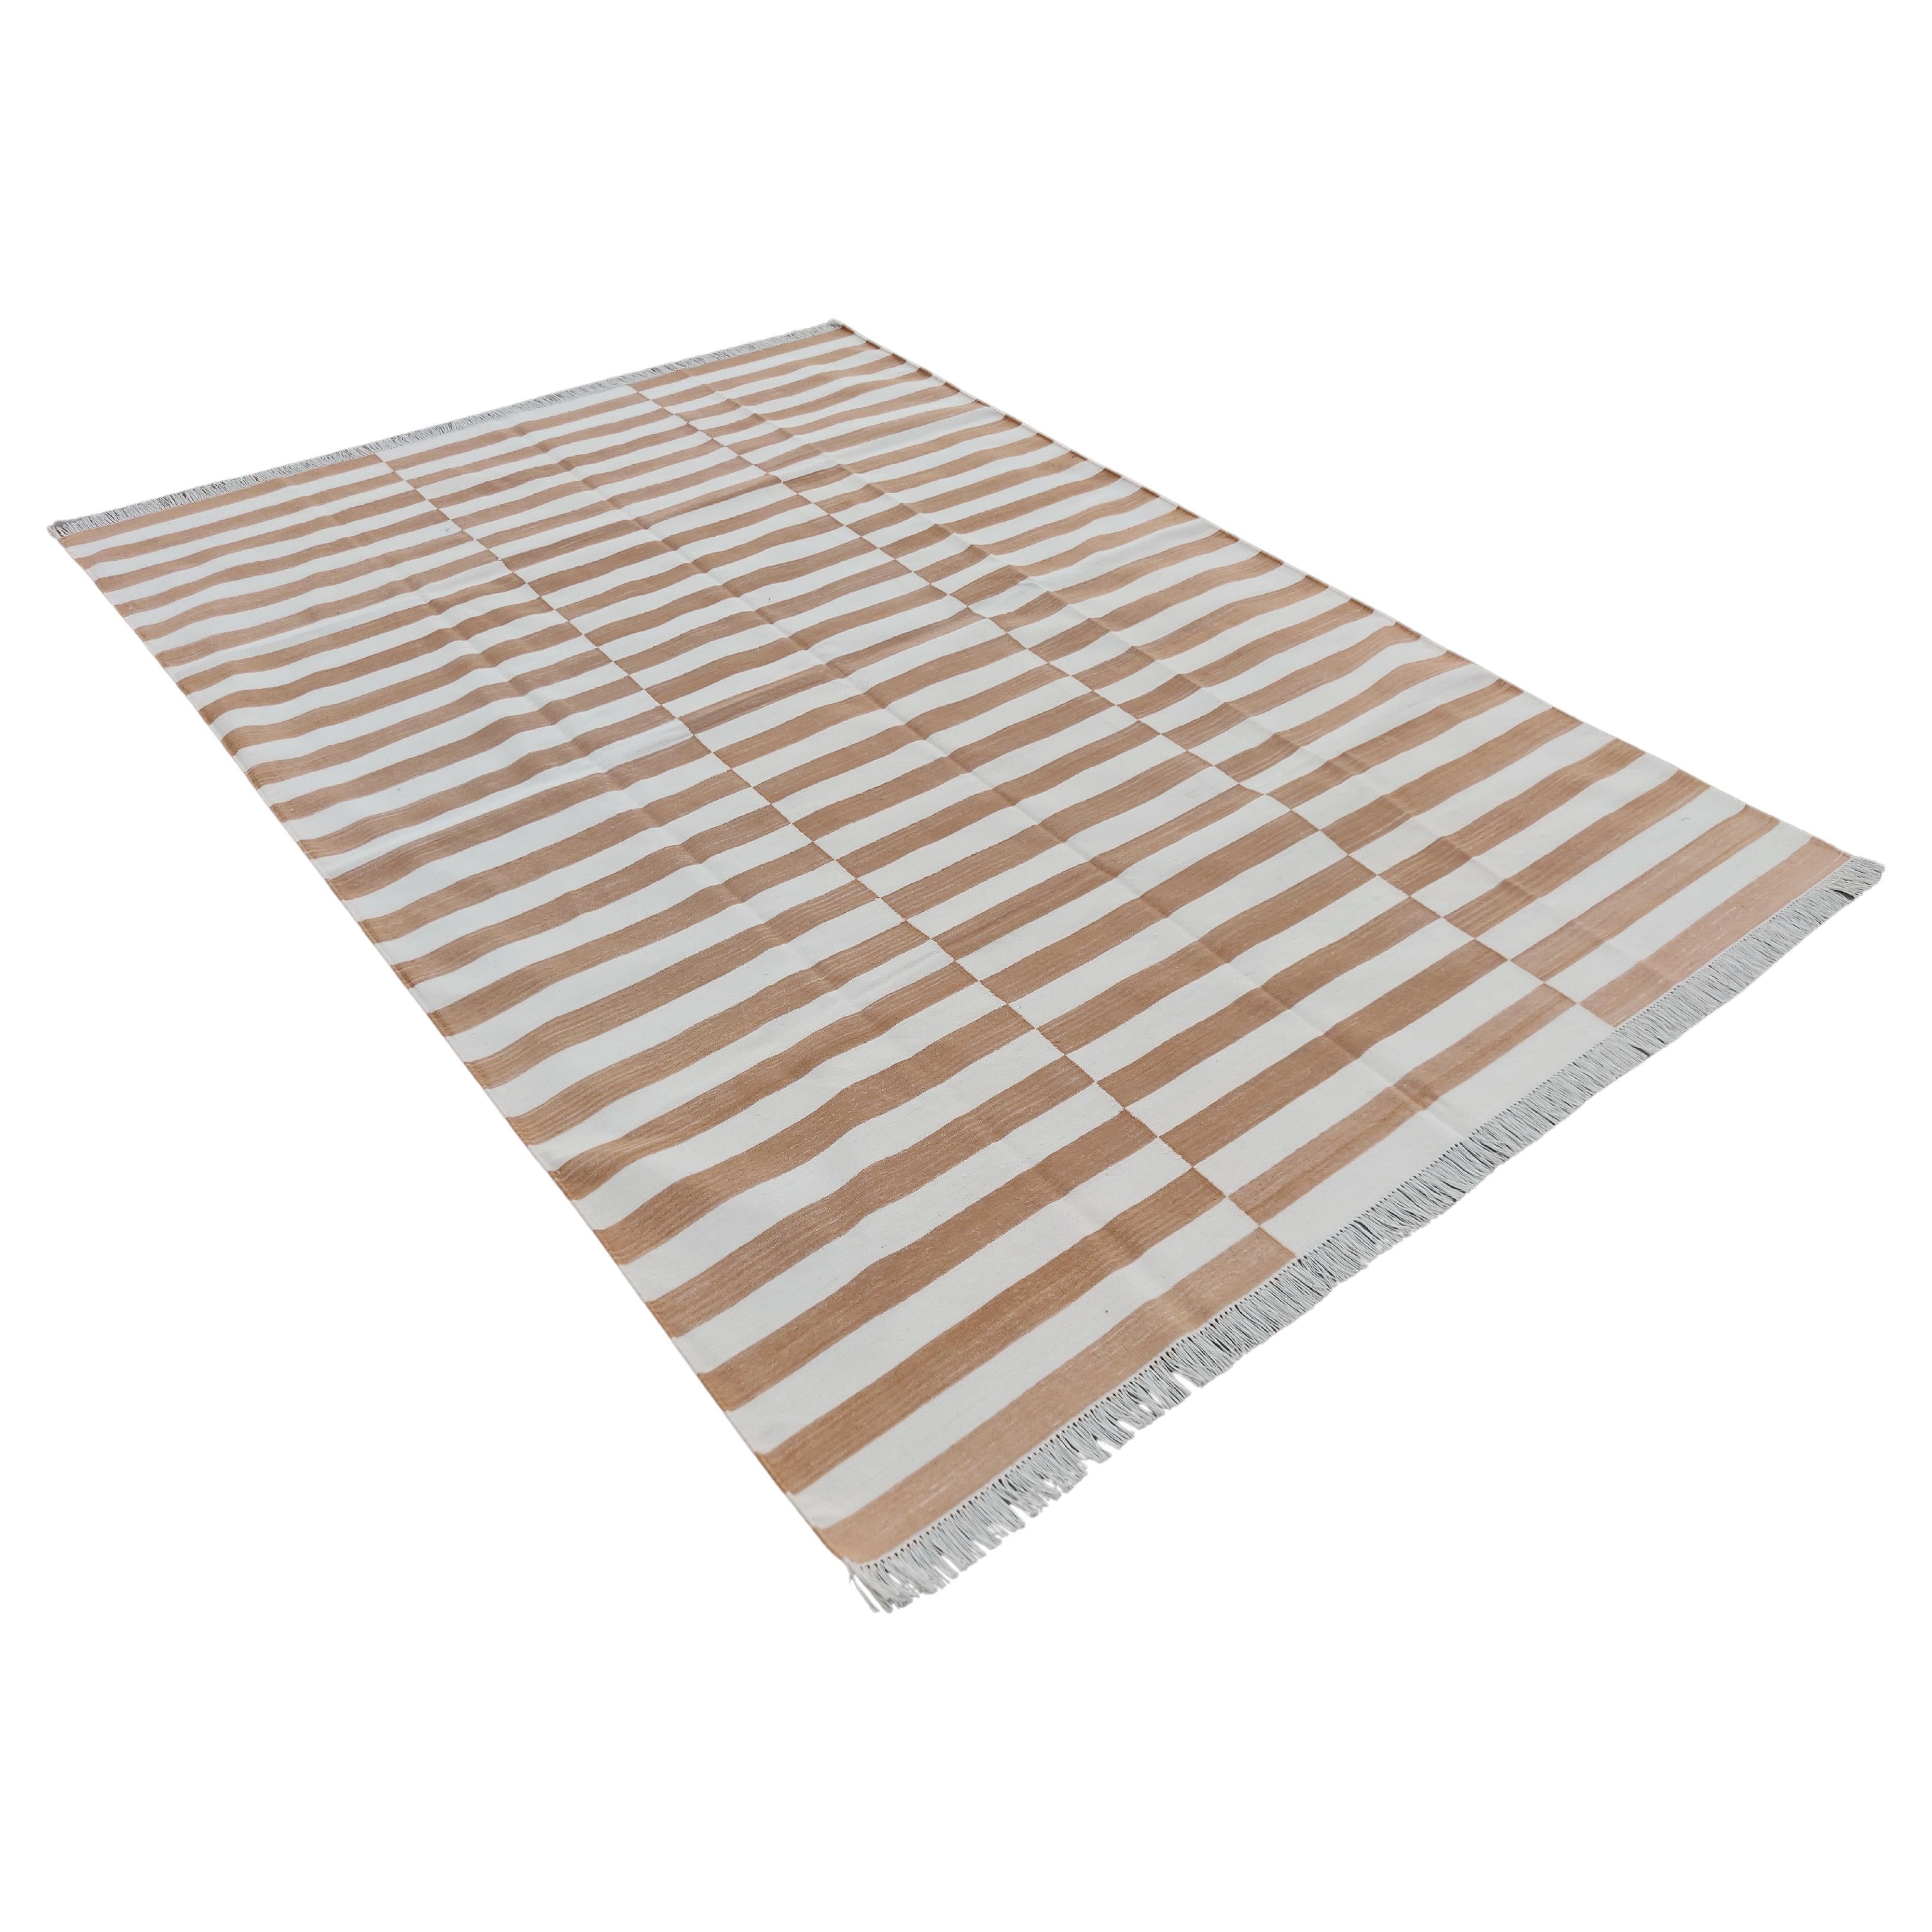 Handmade Cotton Area Flat Weave Rug, 6x9 Tan And White Striped Indian Dhurrie For Sale